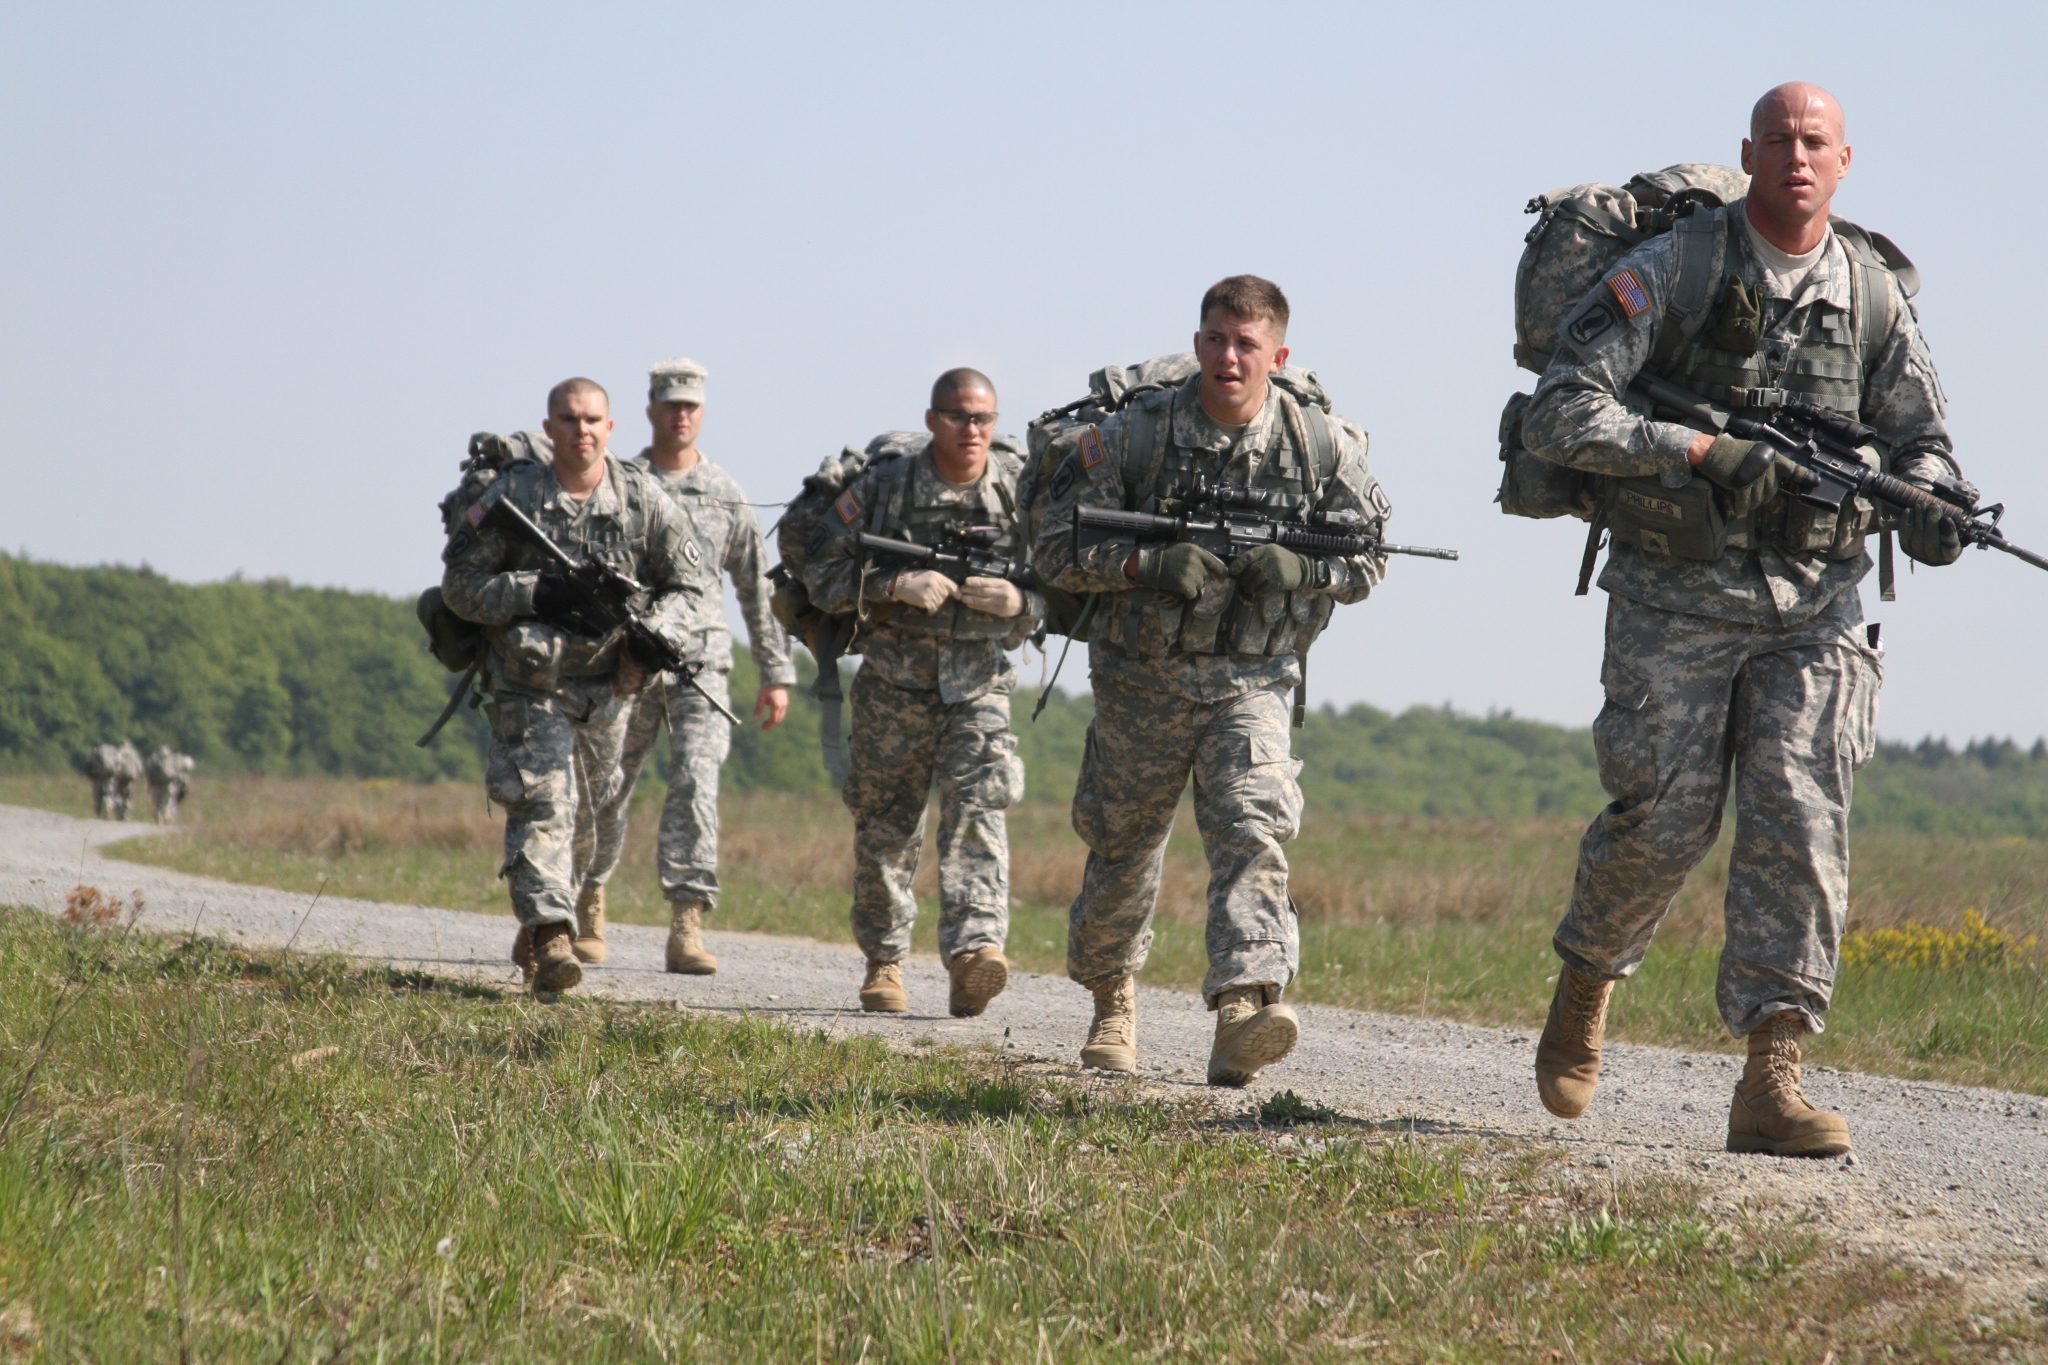 Featured image for “Ruck March Workout”